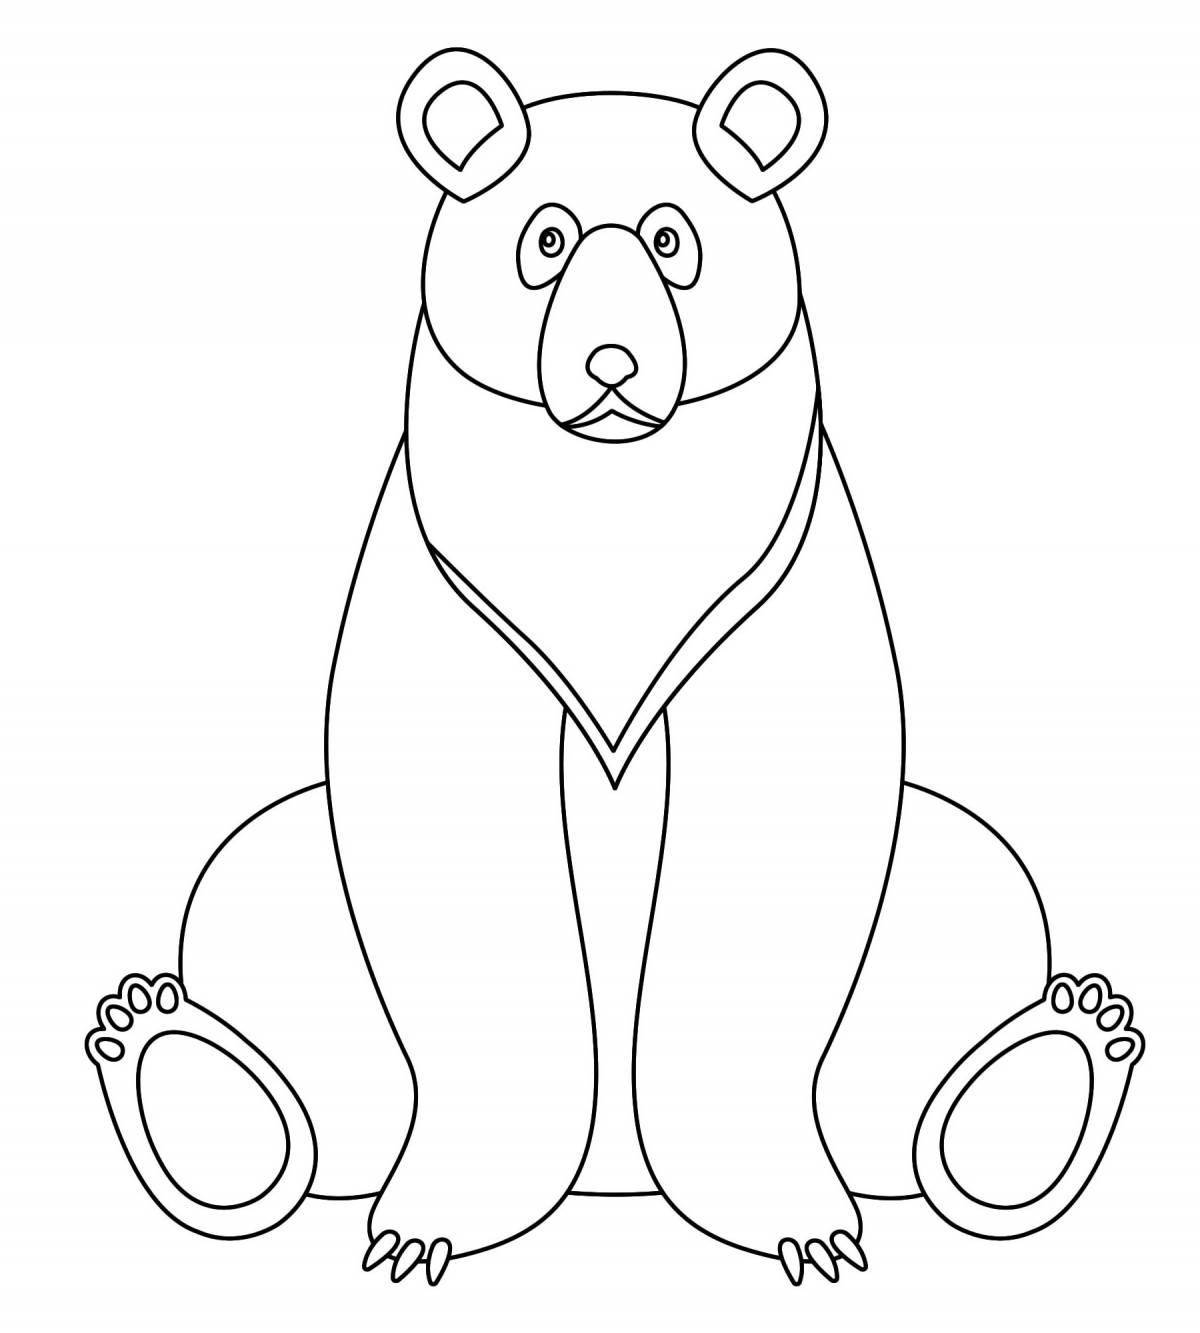 Cute bear coloring book for children 2-3 years old